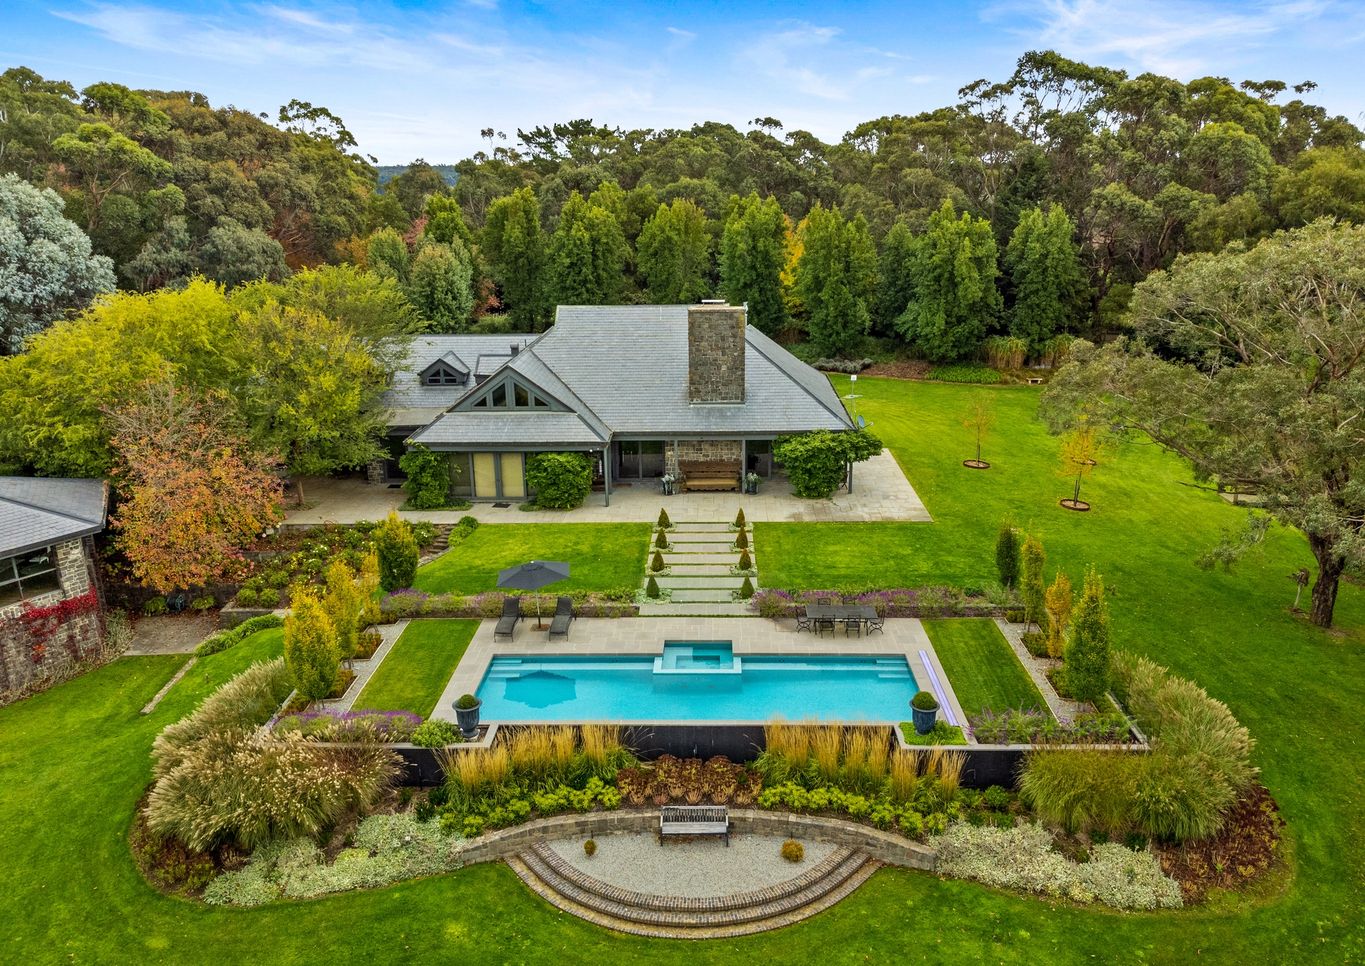 Macedon Ranges property with pool and autumn trees landscape design